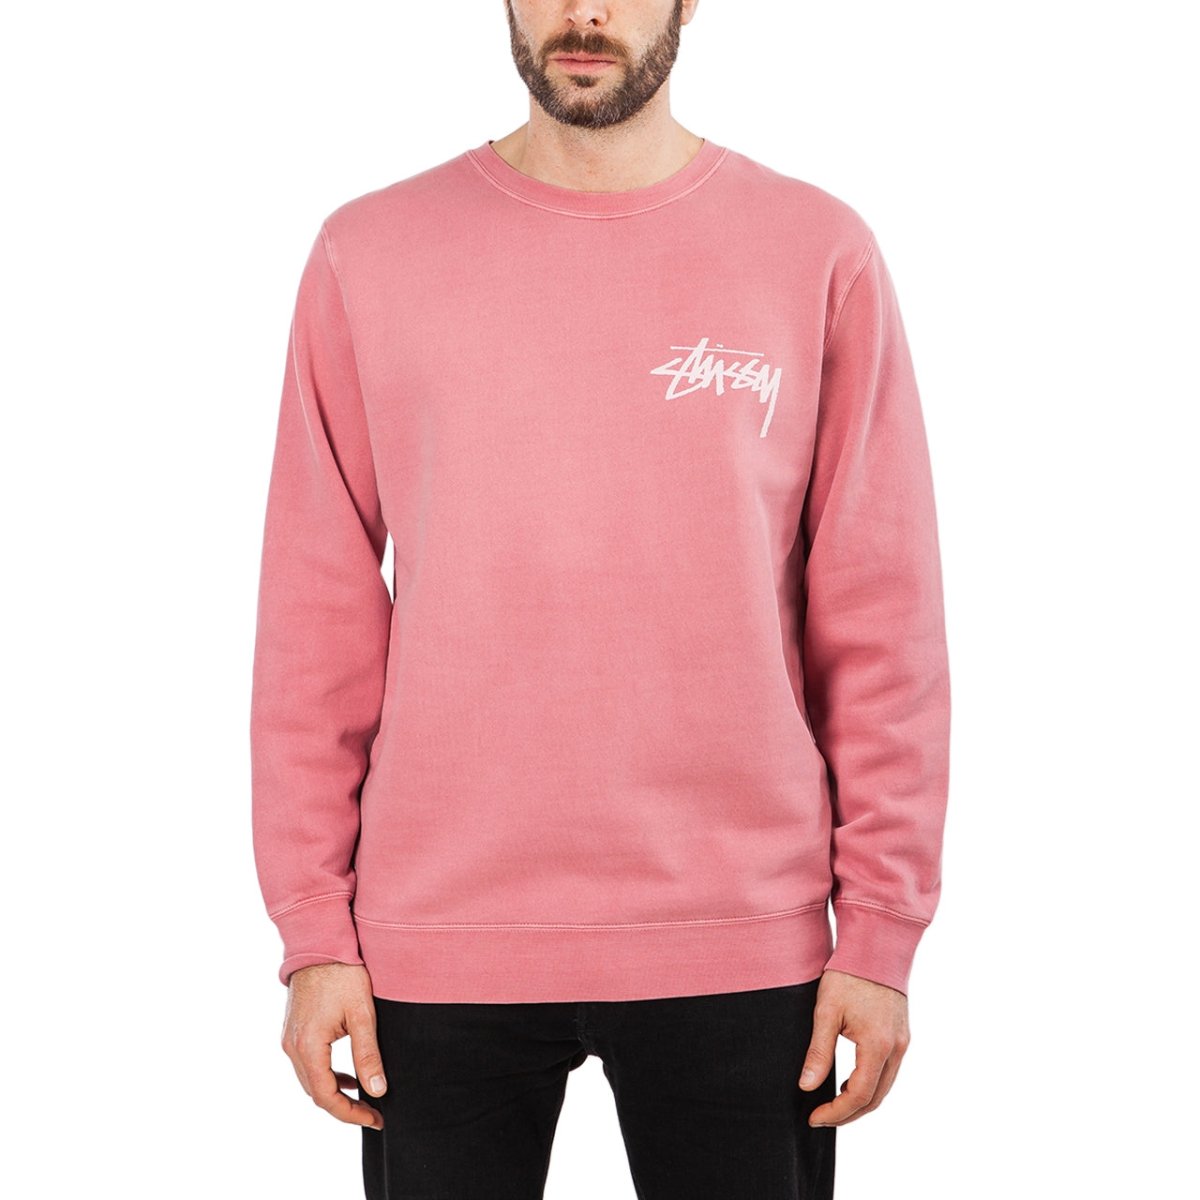 Stüssy Stock Pig. Dyed Crew (Himbeer-Rot)  - Allike Store